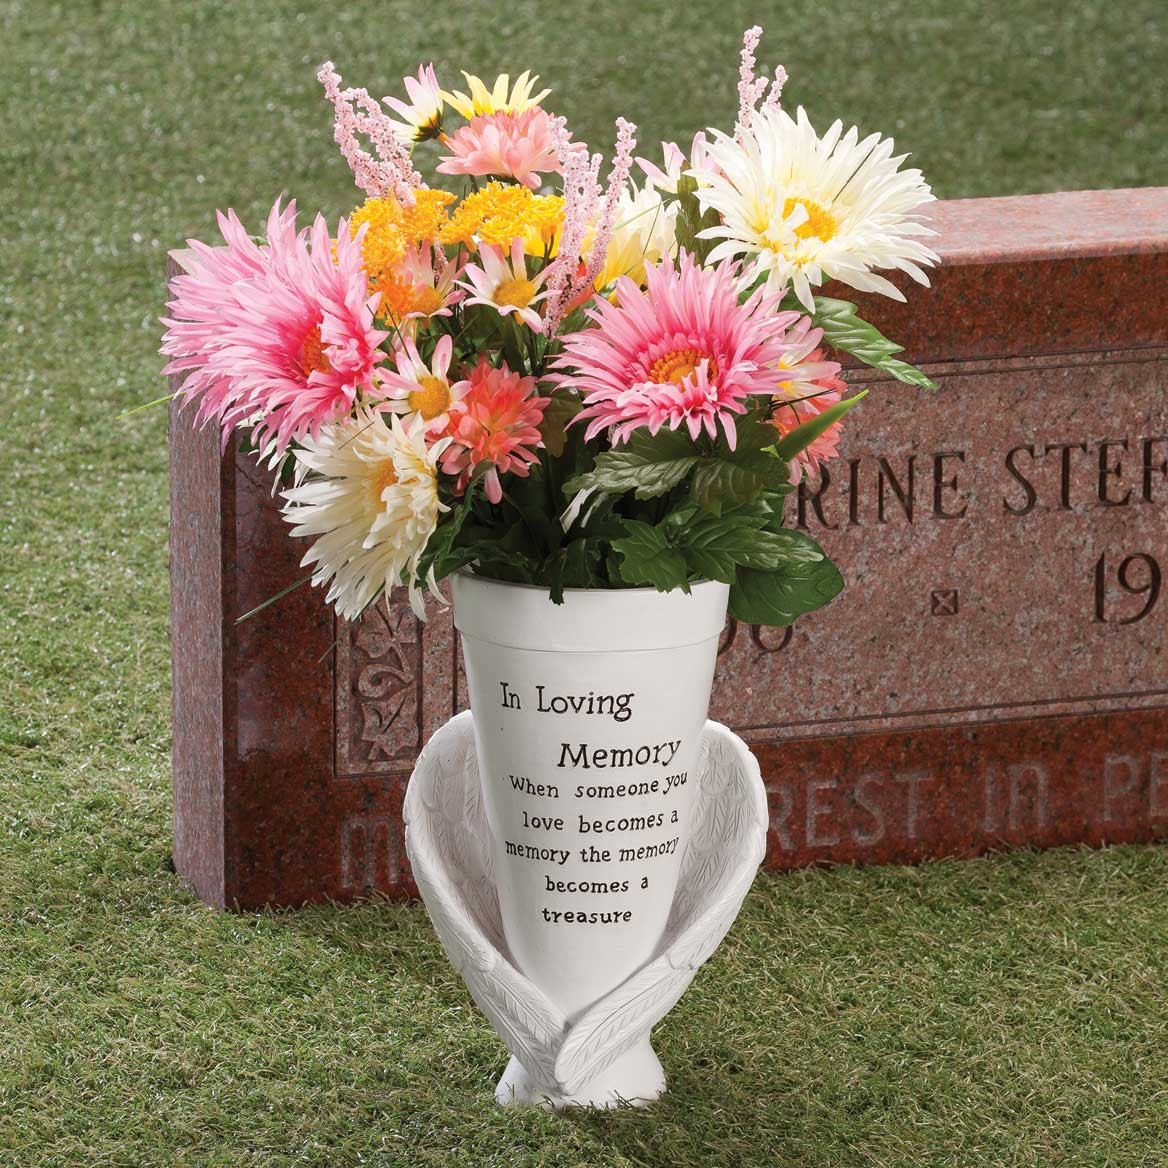 16 Famous Plastic Cemetery Vases with Stakes 10 2024 free download plastic cemetery vases with stakes 10 of military grave marker grave marker military marker walter drake with regard to resin memorial cemetery vase by maple lane creationsac284c2a2 357863